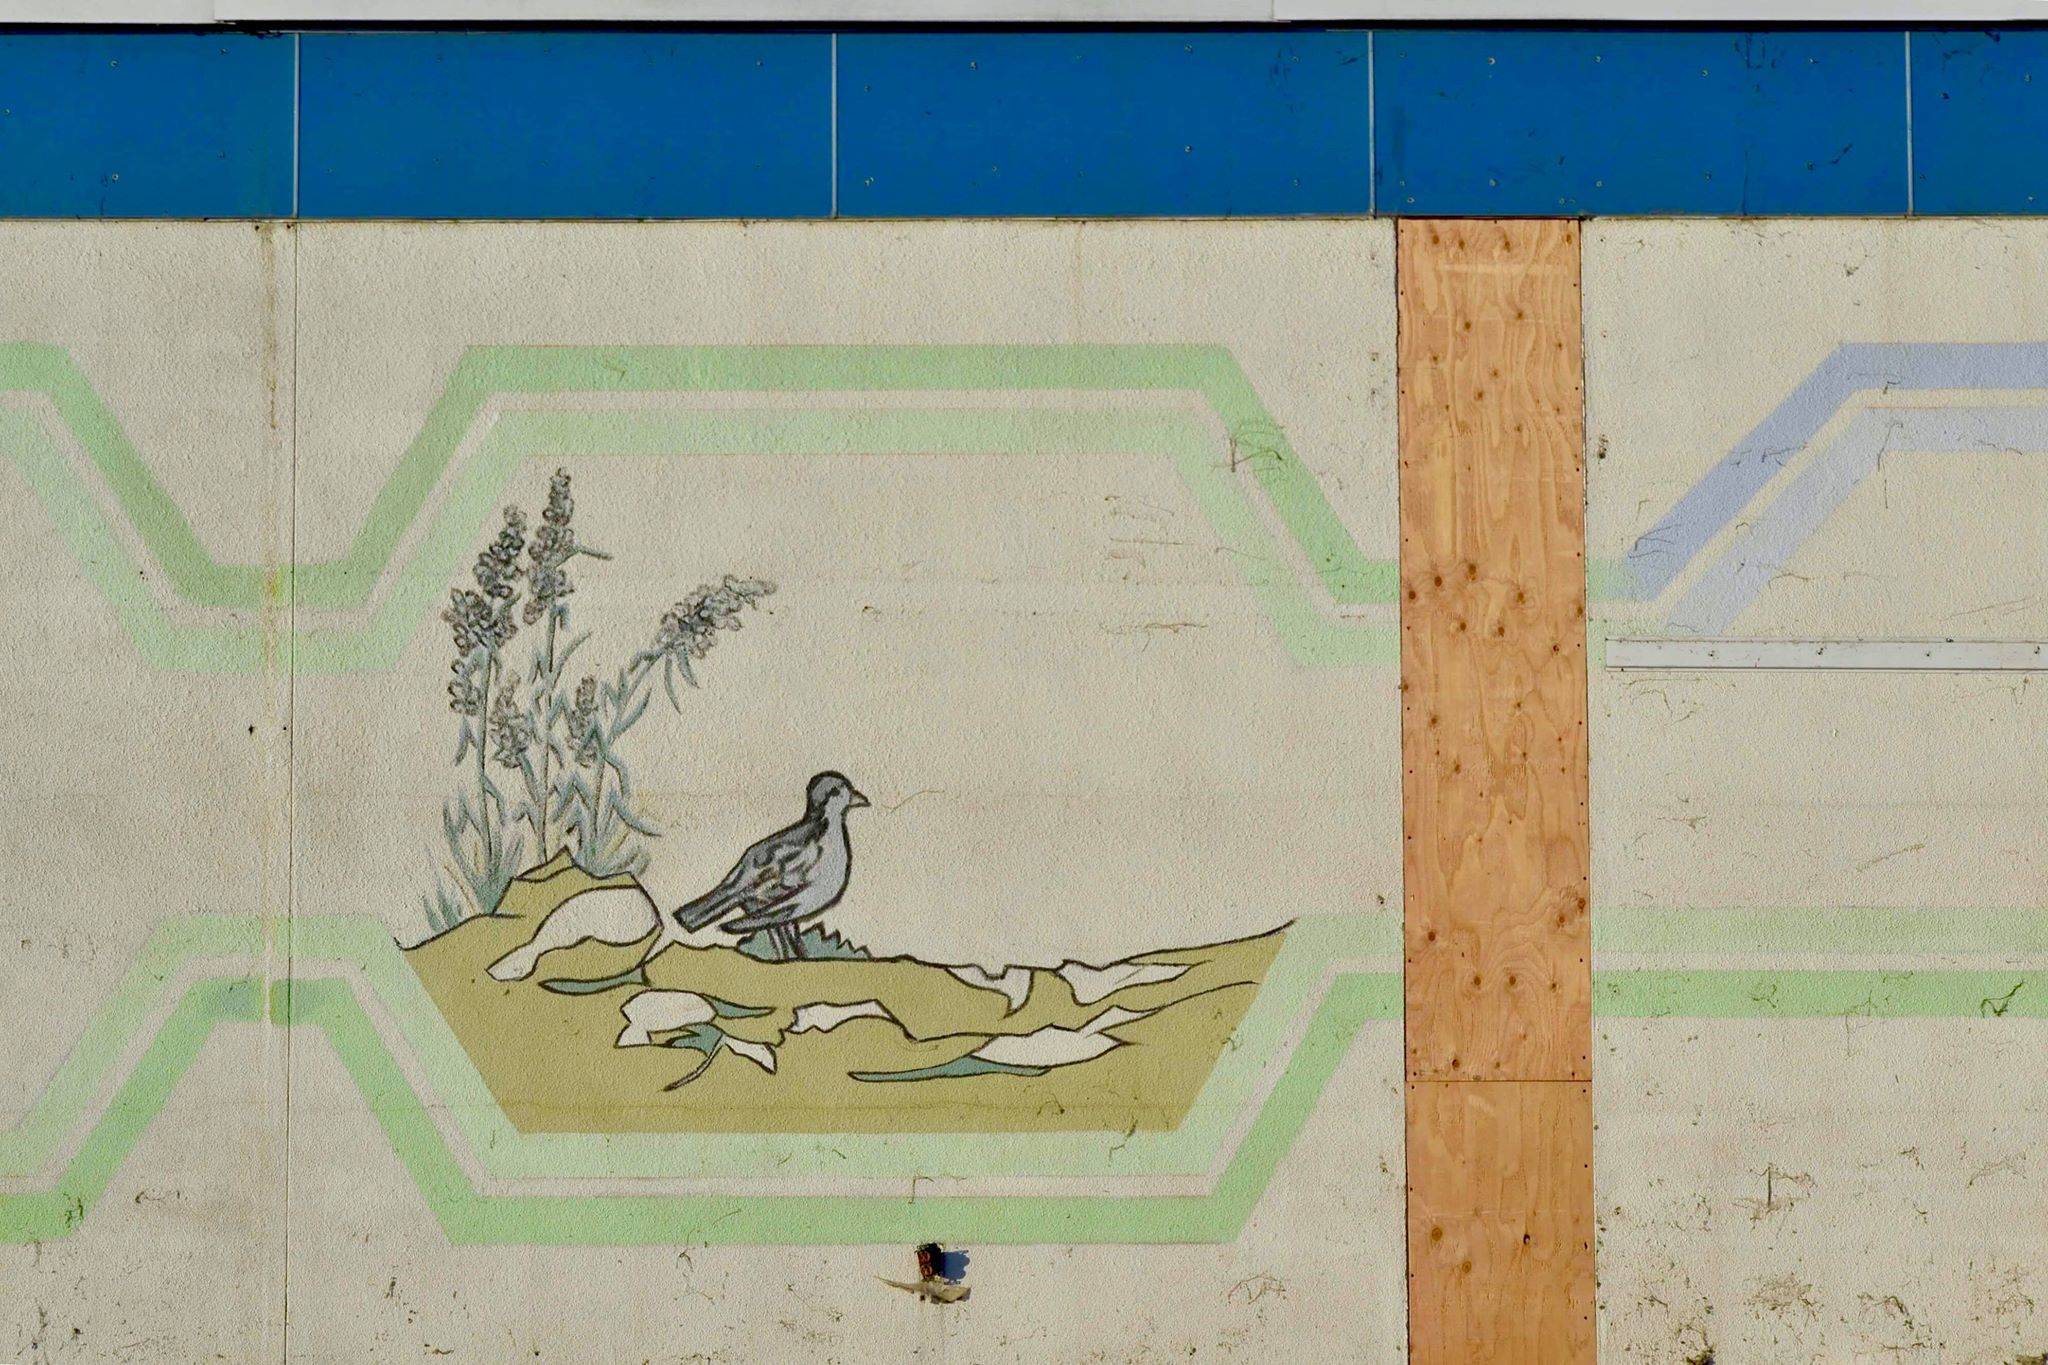 After construction workers removed siding from the facade of the Kenai Municipal Airport, a mural with iconic Kenai images like fishing nets, the St. Nicholas Russian Orthodox chapel and a dog musher, was revealed on Tuesday, Jan. 15, 2019 in Kenai, Alaska. (Photo by Victoria Petersen/Peninsula Clarion)